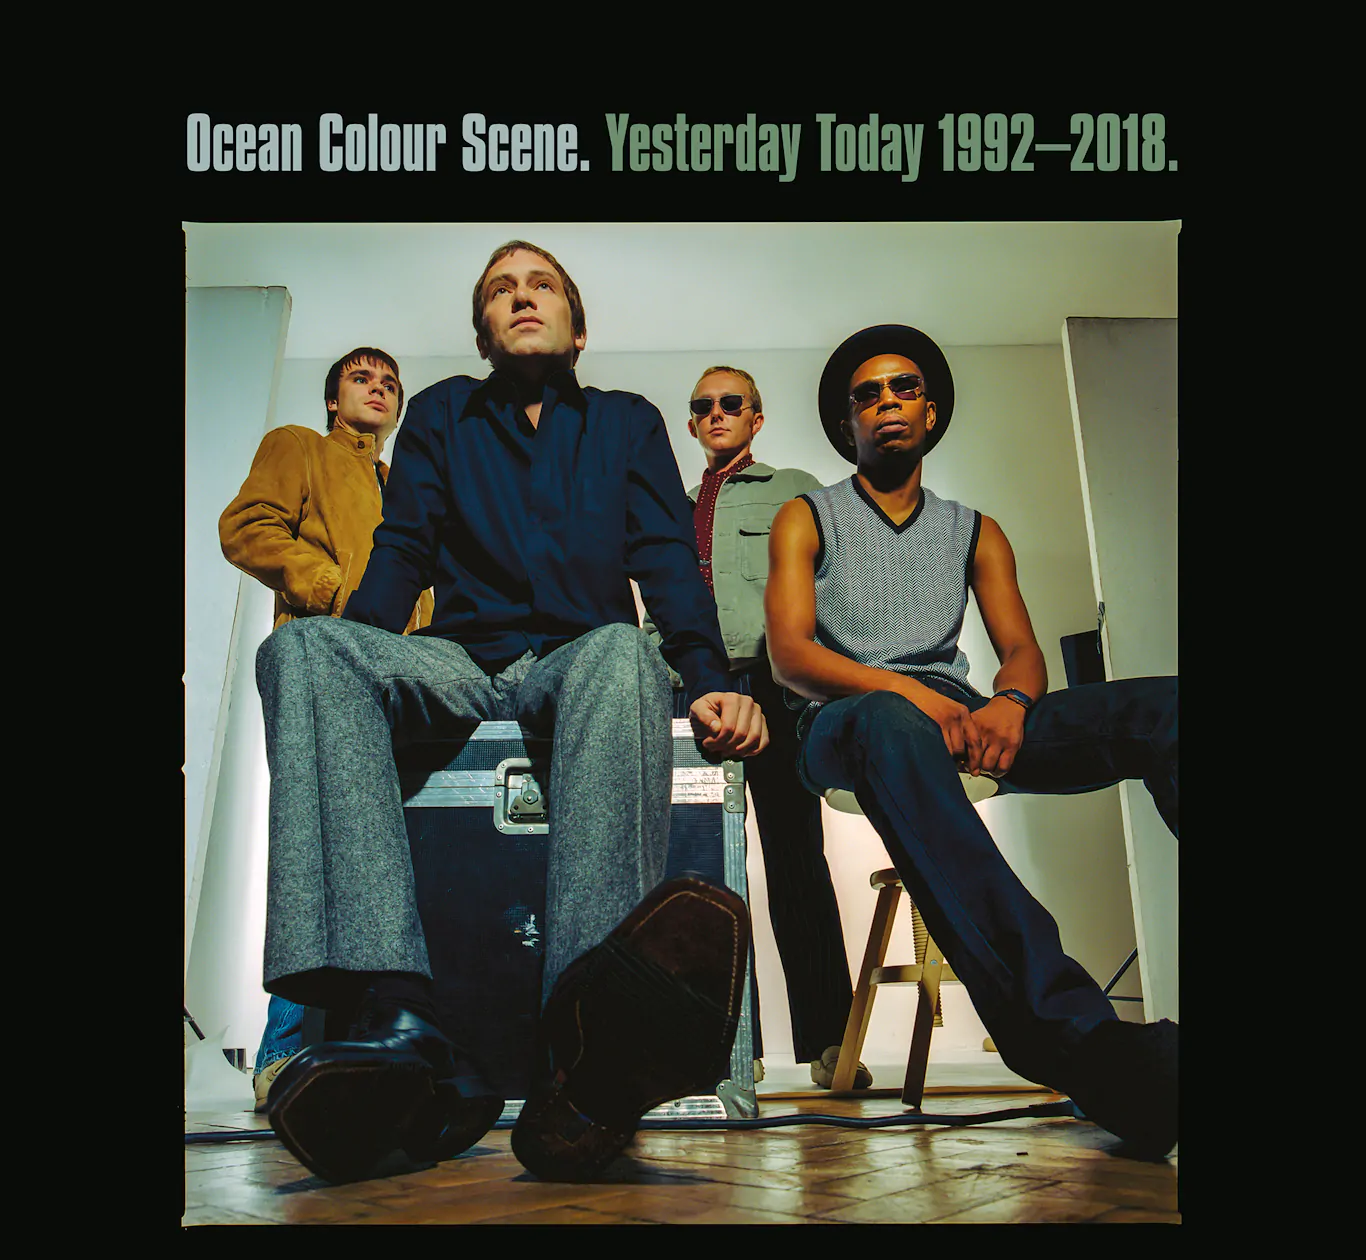 OCEAN COLOUR SCENE announce career spanning collection – ‘Yesterday Today: 1992 – 2018’ – out 24 February